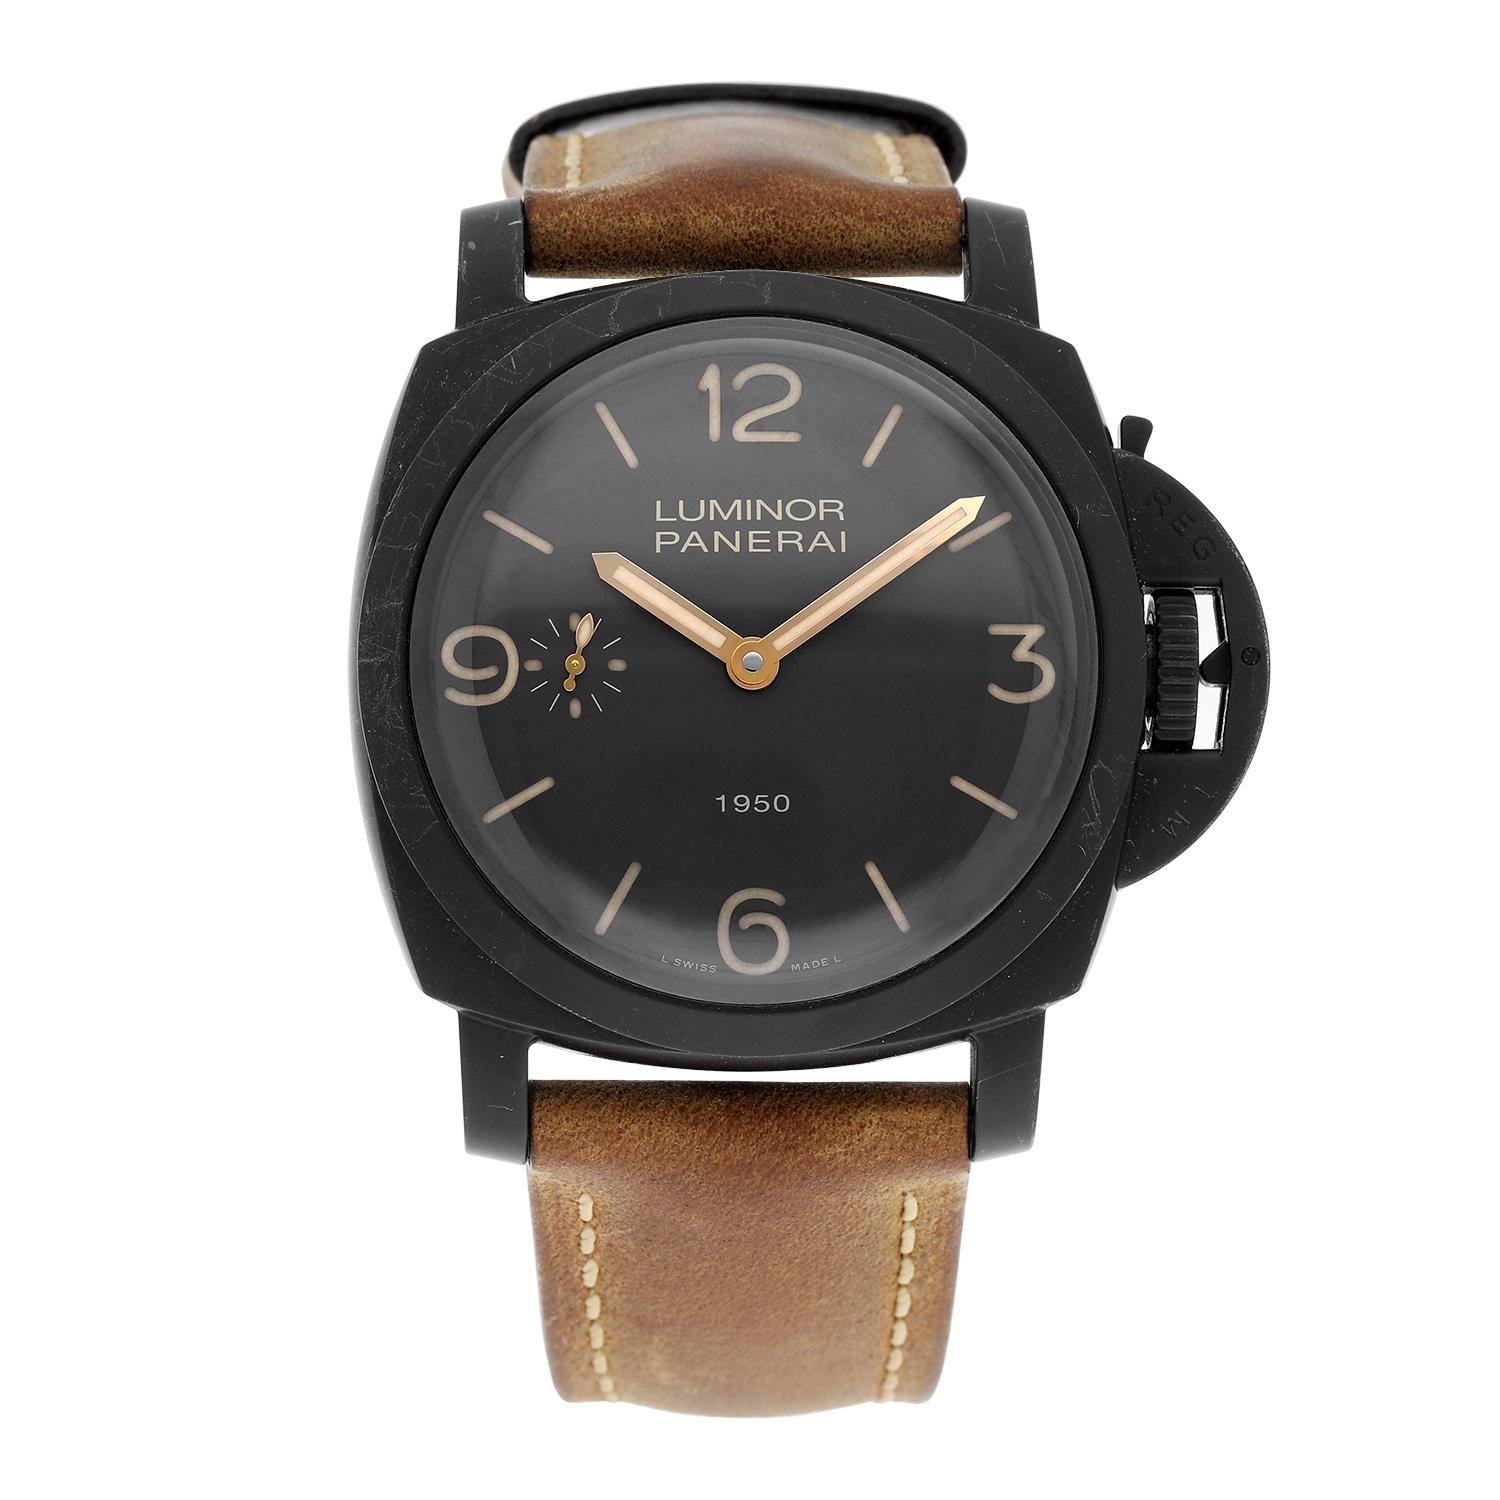 The Panerai PAM00375 is a men's watch that is part of a limited collection from Officine Panerai. Only 2,000 of these watches were created. The watch has a 47mm composite case, a fixed bezel, and a brown dial covered by a scratch resistant sapphire